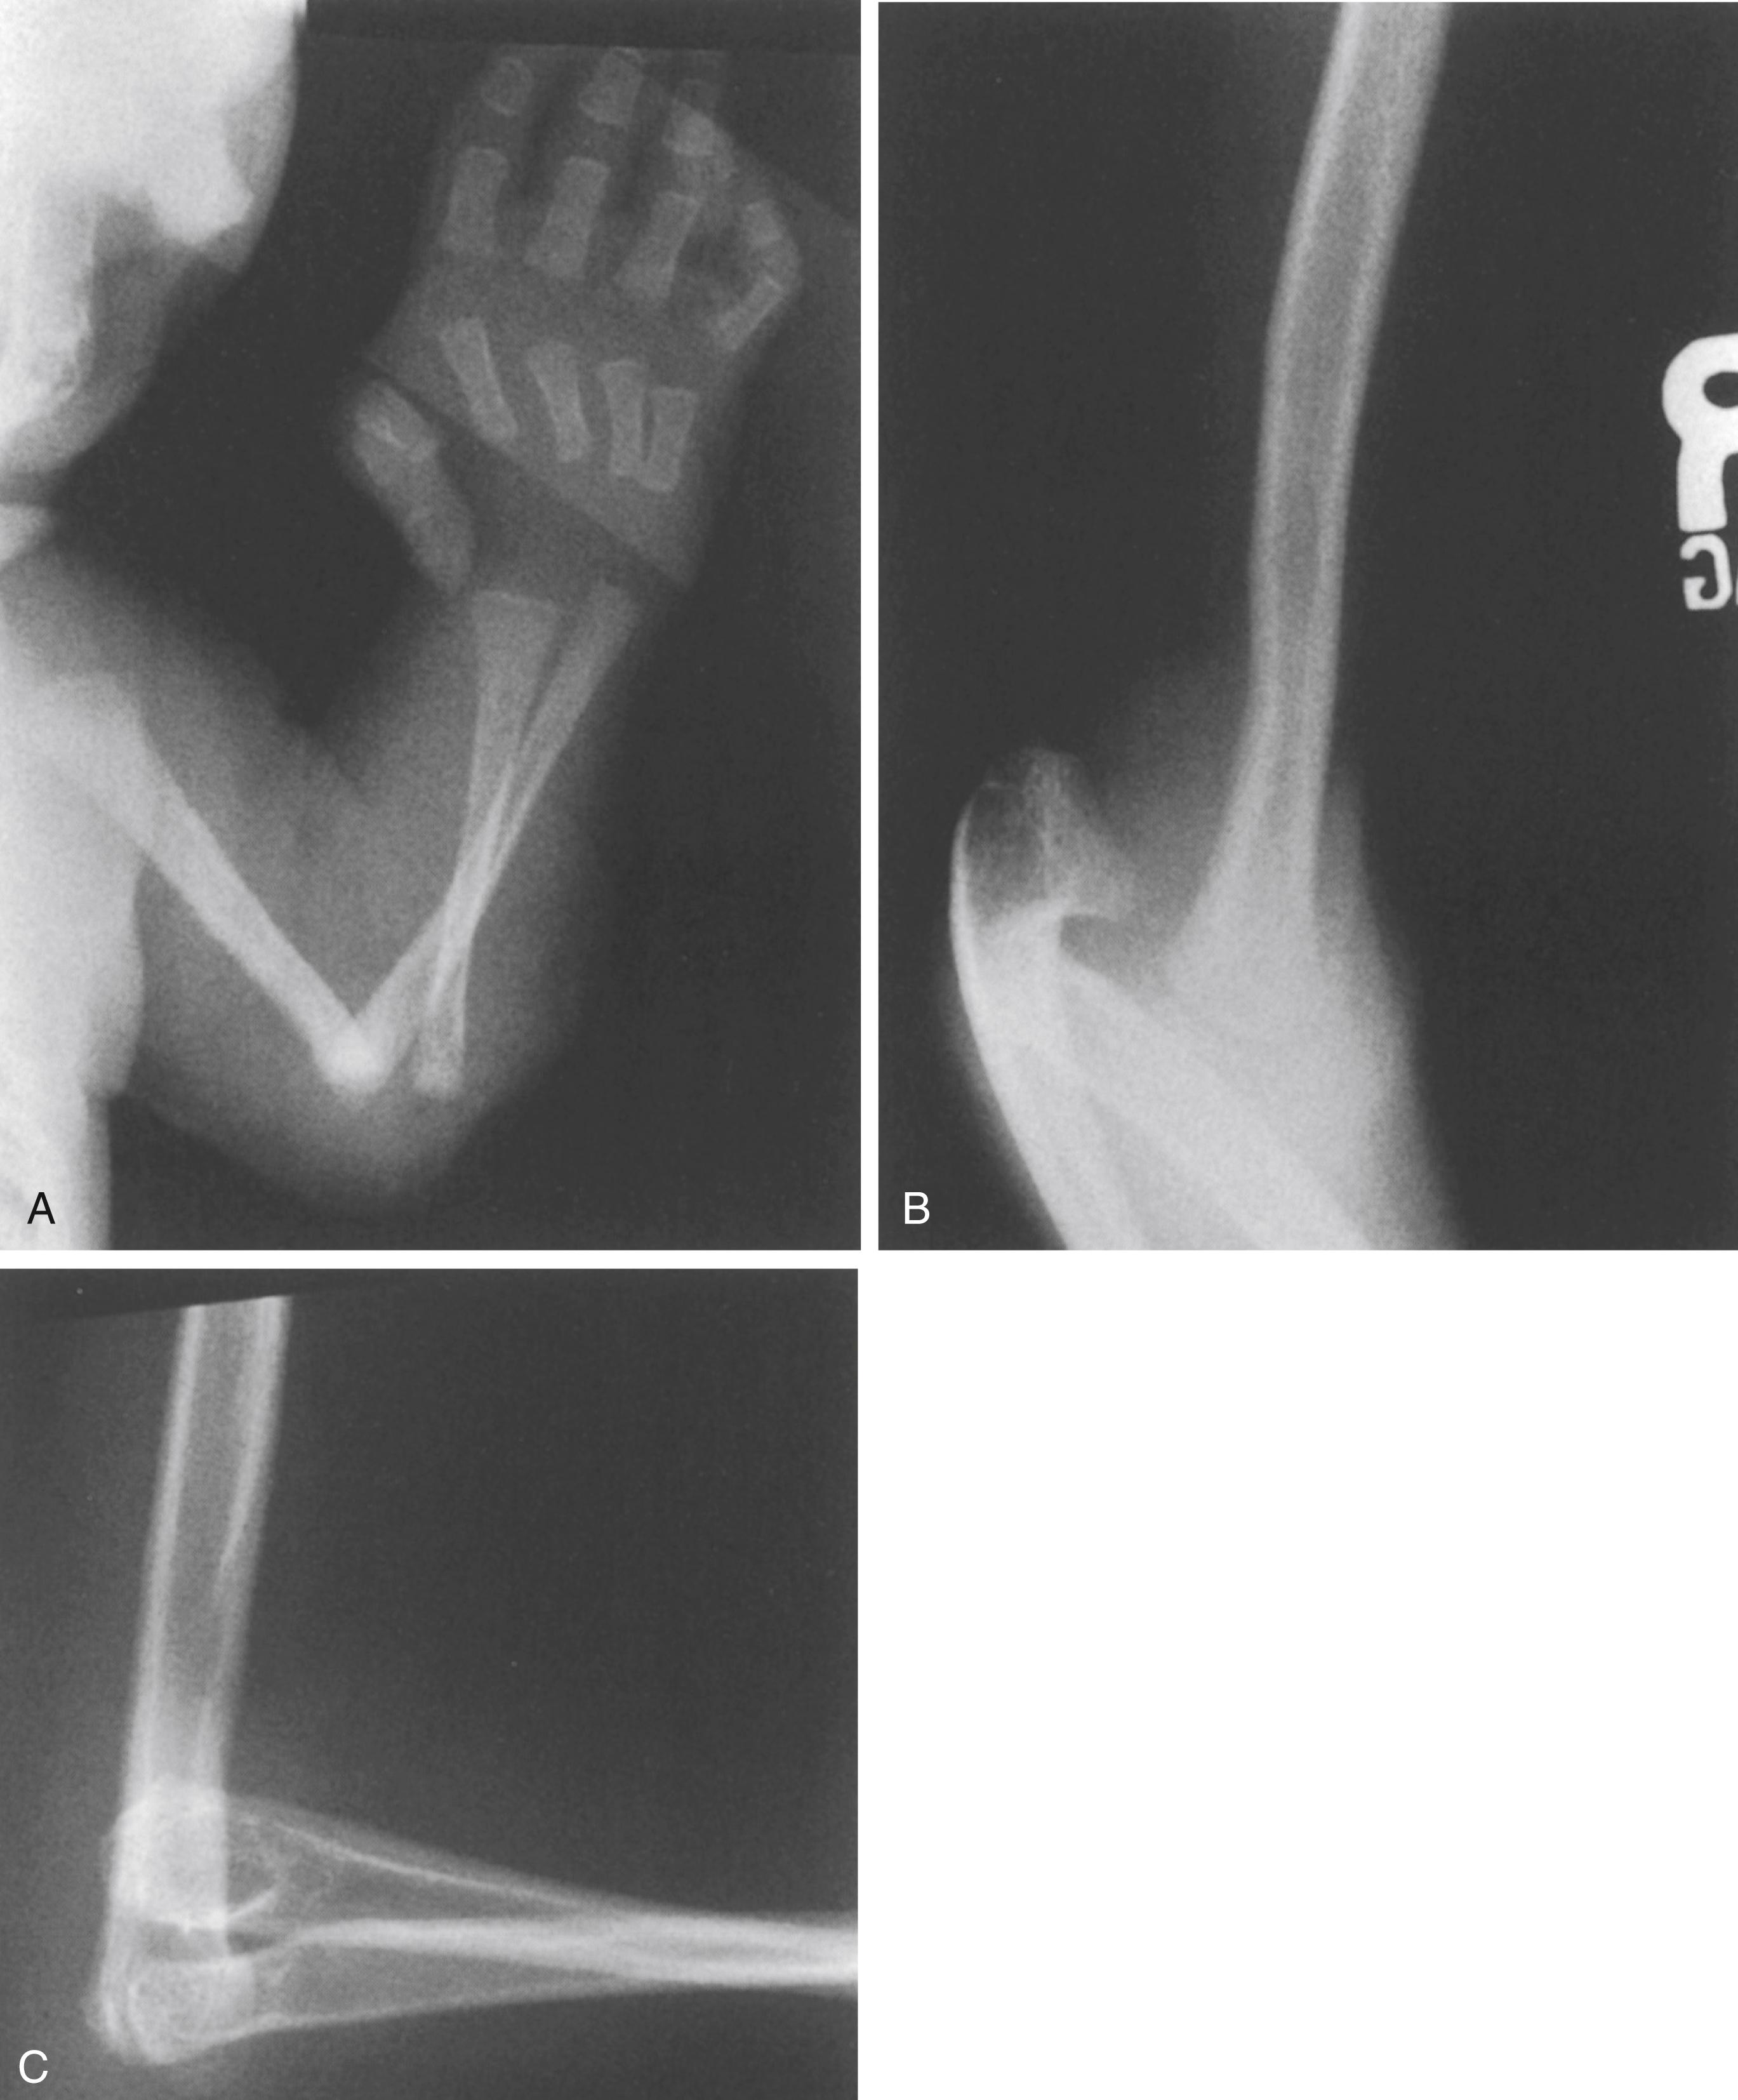 FIG. 37.18, Larsen syndrome. (A) Right elbow in a newborn. Note the complete radiocapitellar and humeroulnar dislocation. The thumb is also dislocated at the metacarpophalangeal joint. (B and C) Radiographic appearance at age 6 years. Marked webbing and a 90-degree flexion contracture accompany the untreated deformity.